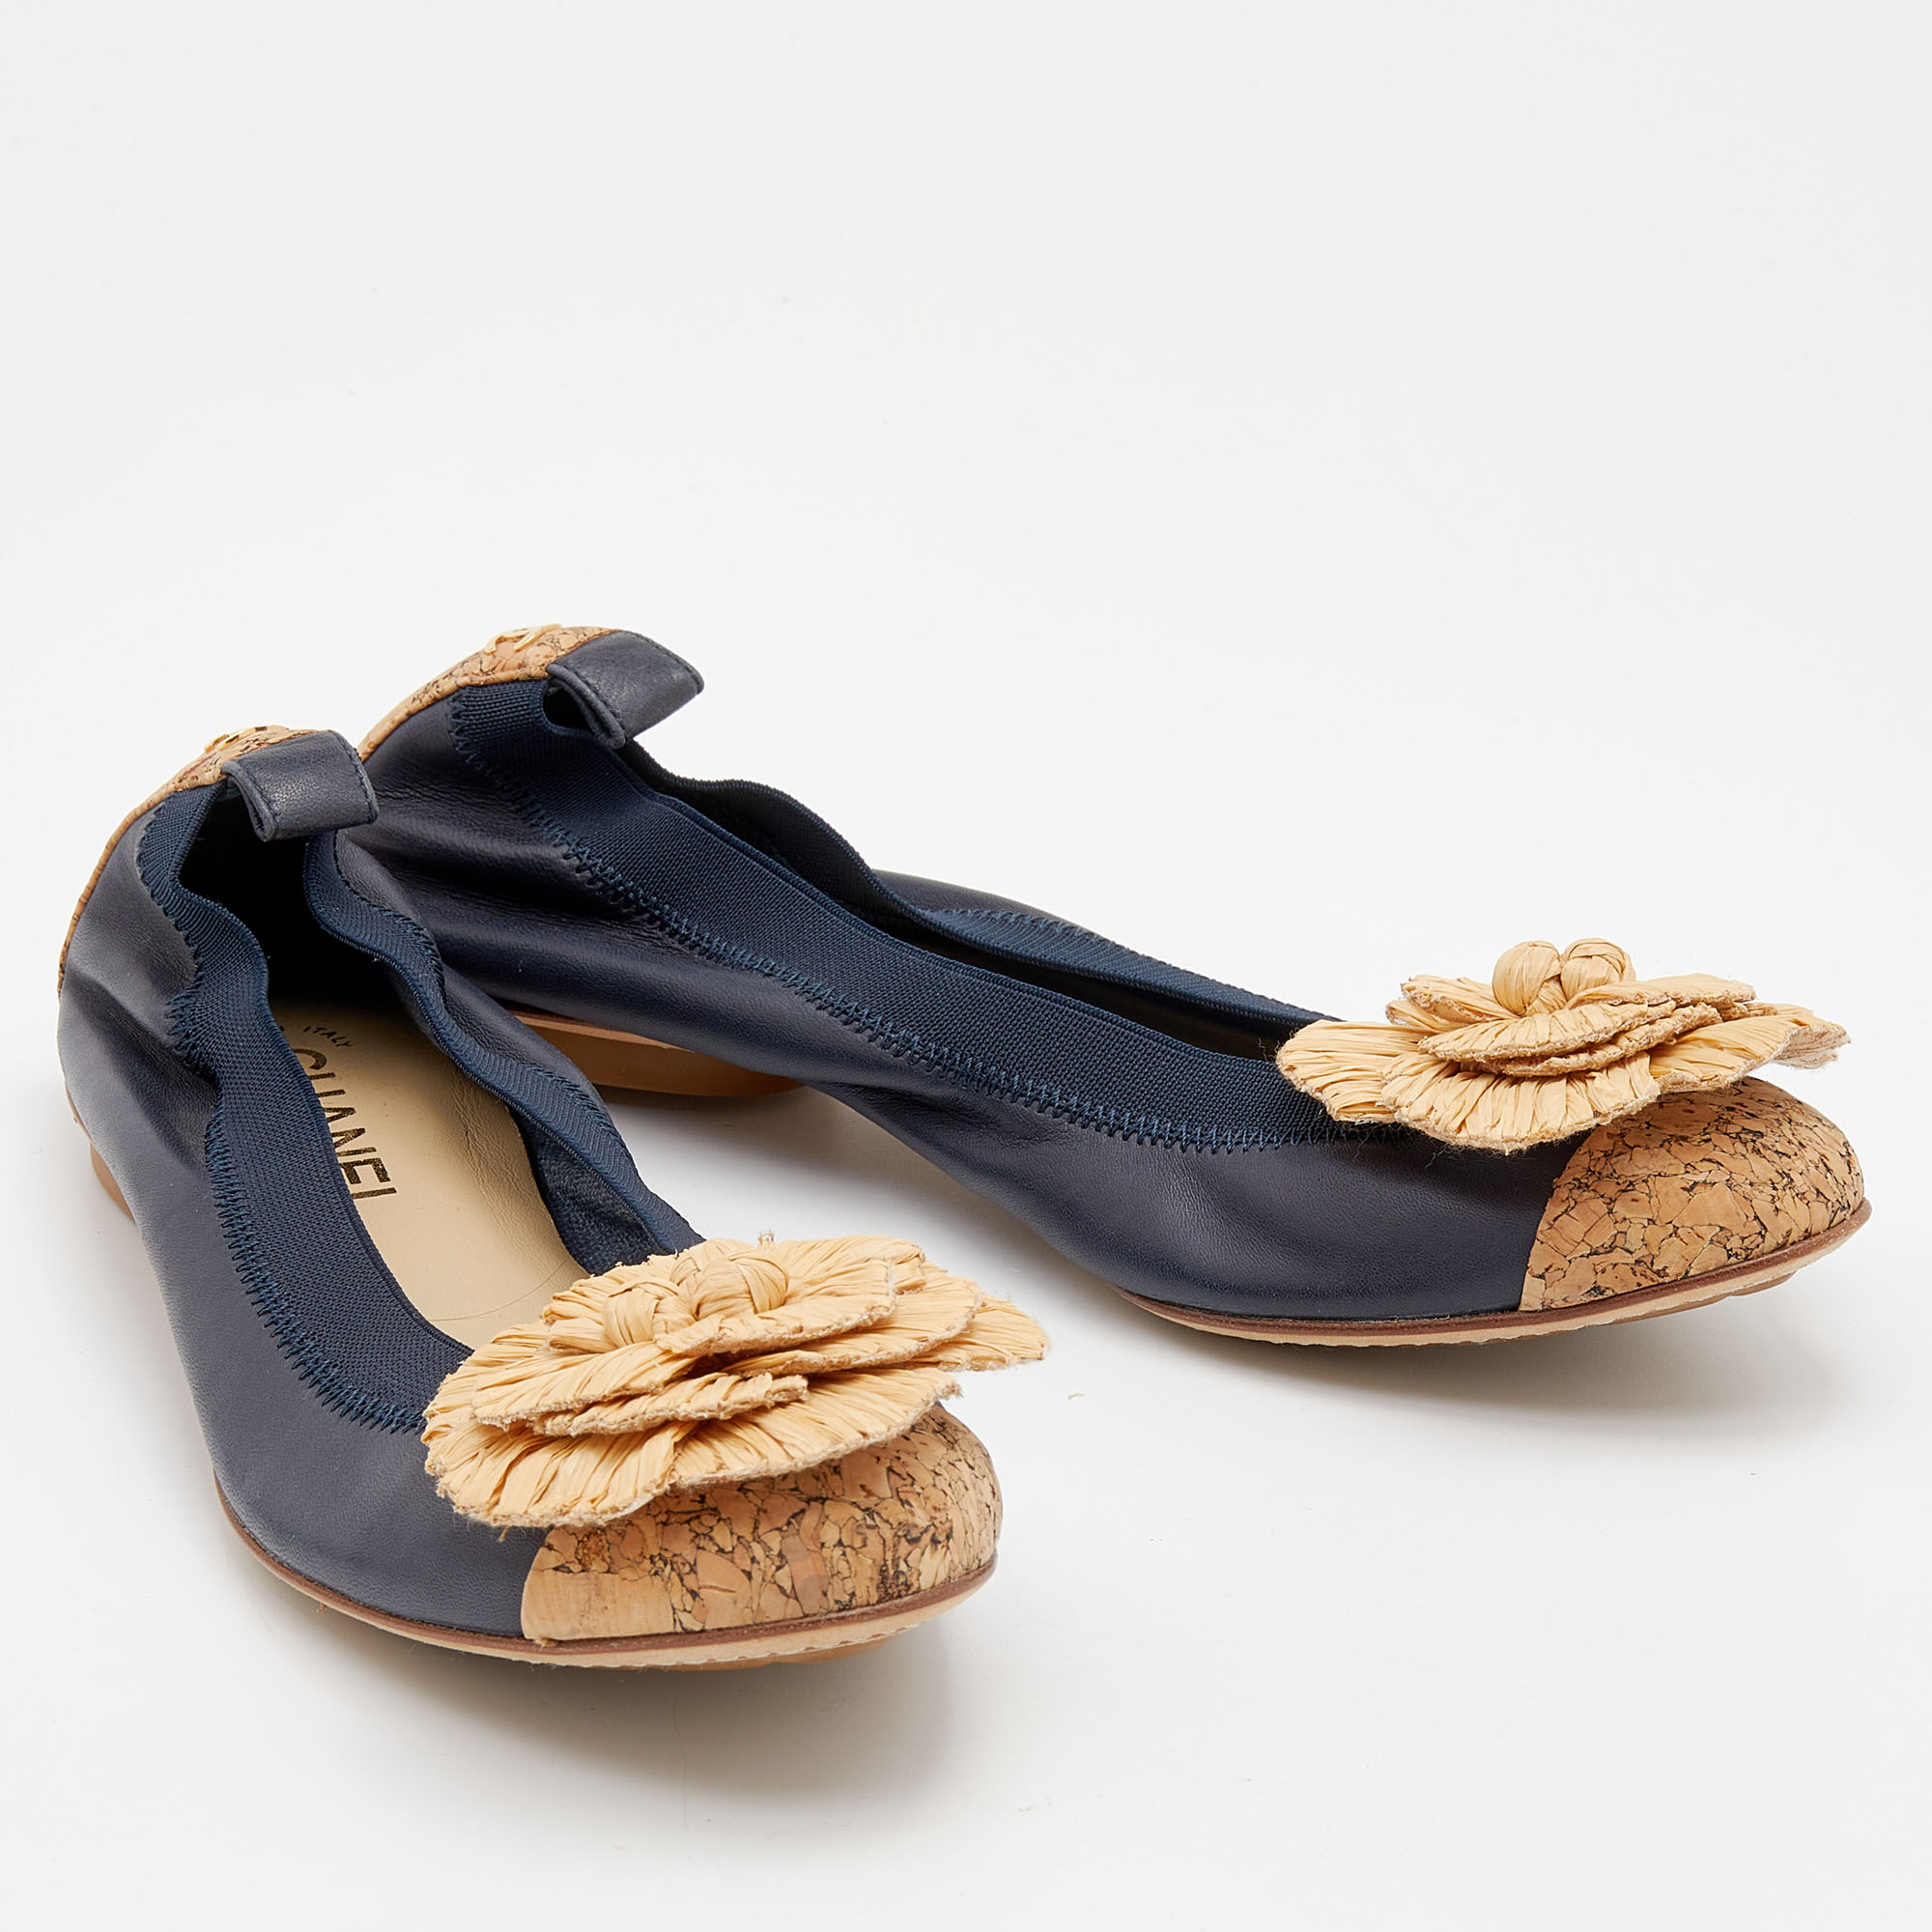 Chanel Navy Blue/Beige Leather And Straw Camellia Ballet Flats Size 38